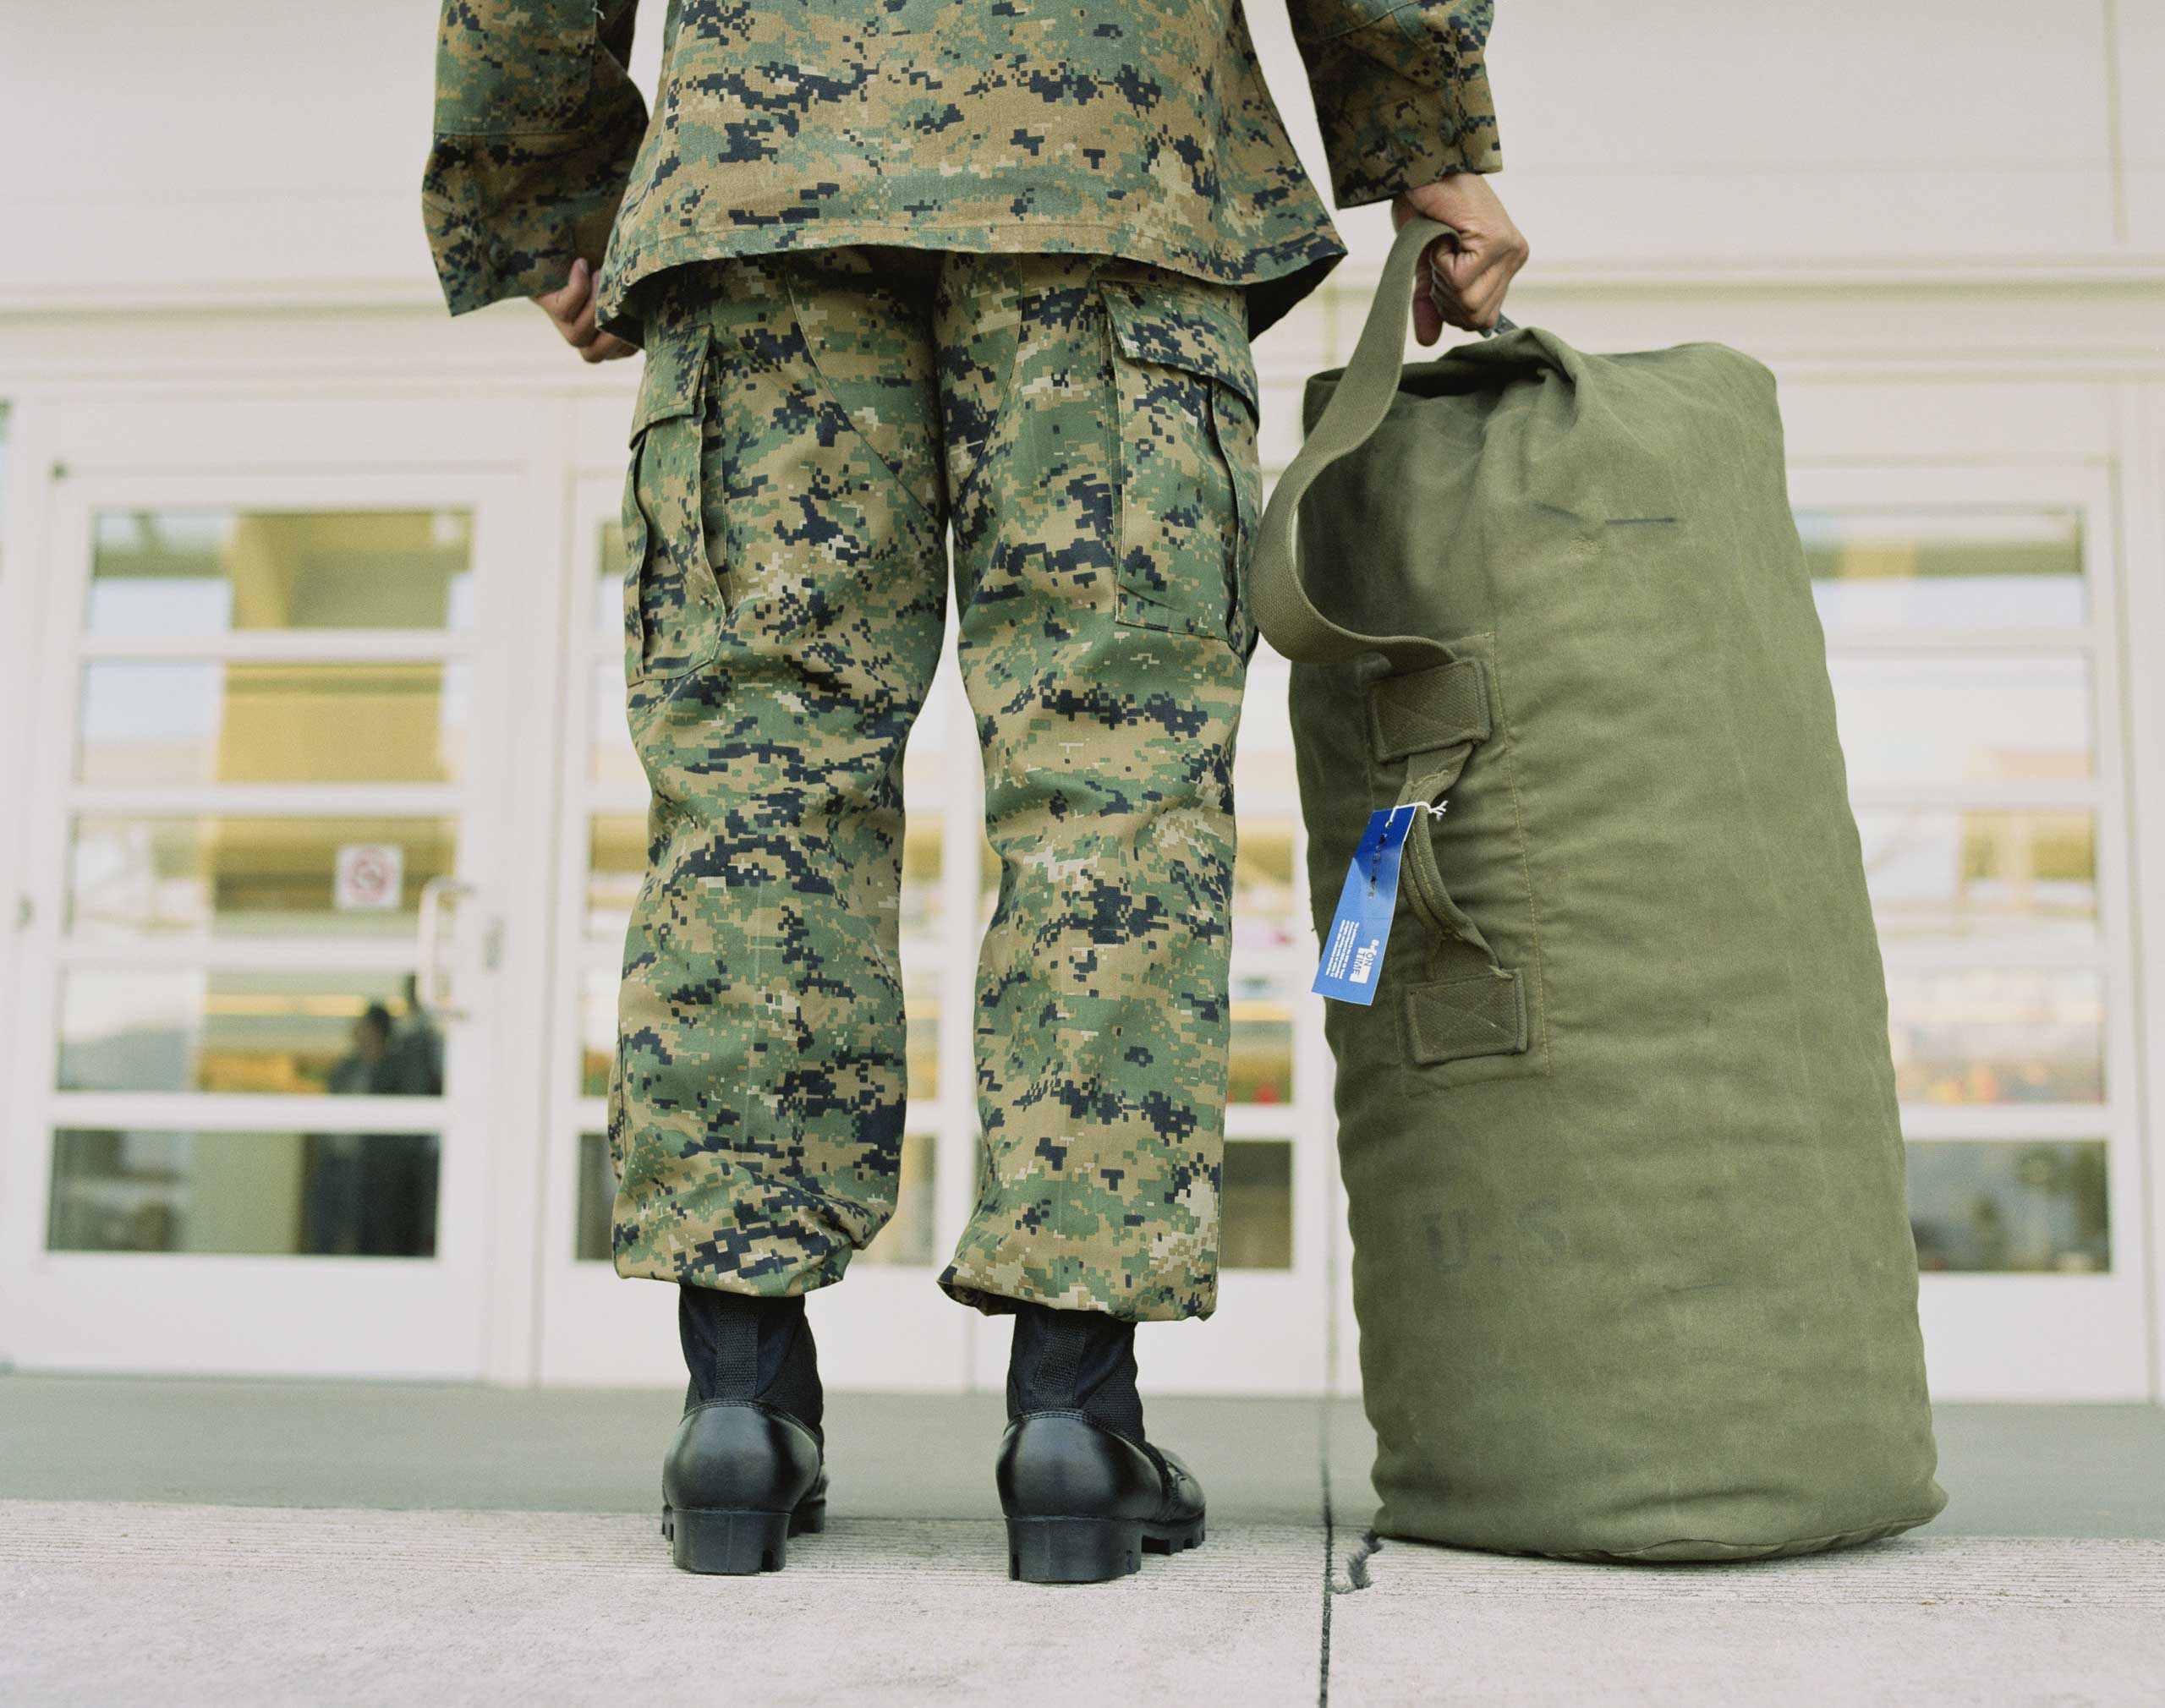 Military soldier with bag in airport, low section (Mike Powell—Getty Images)